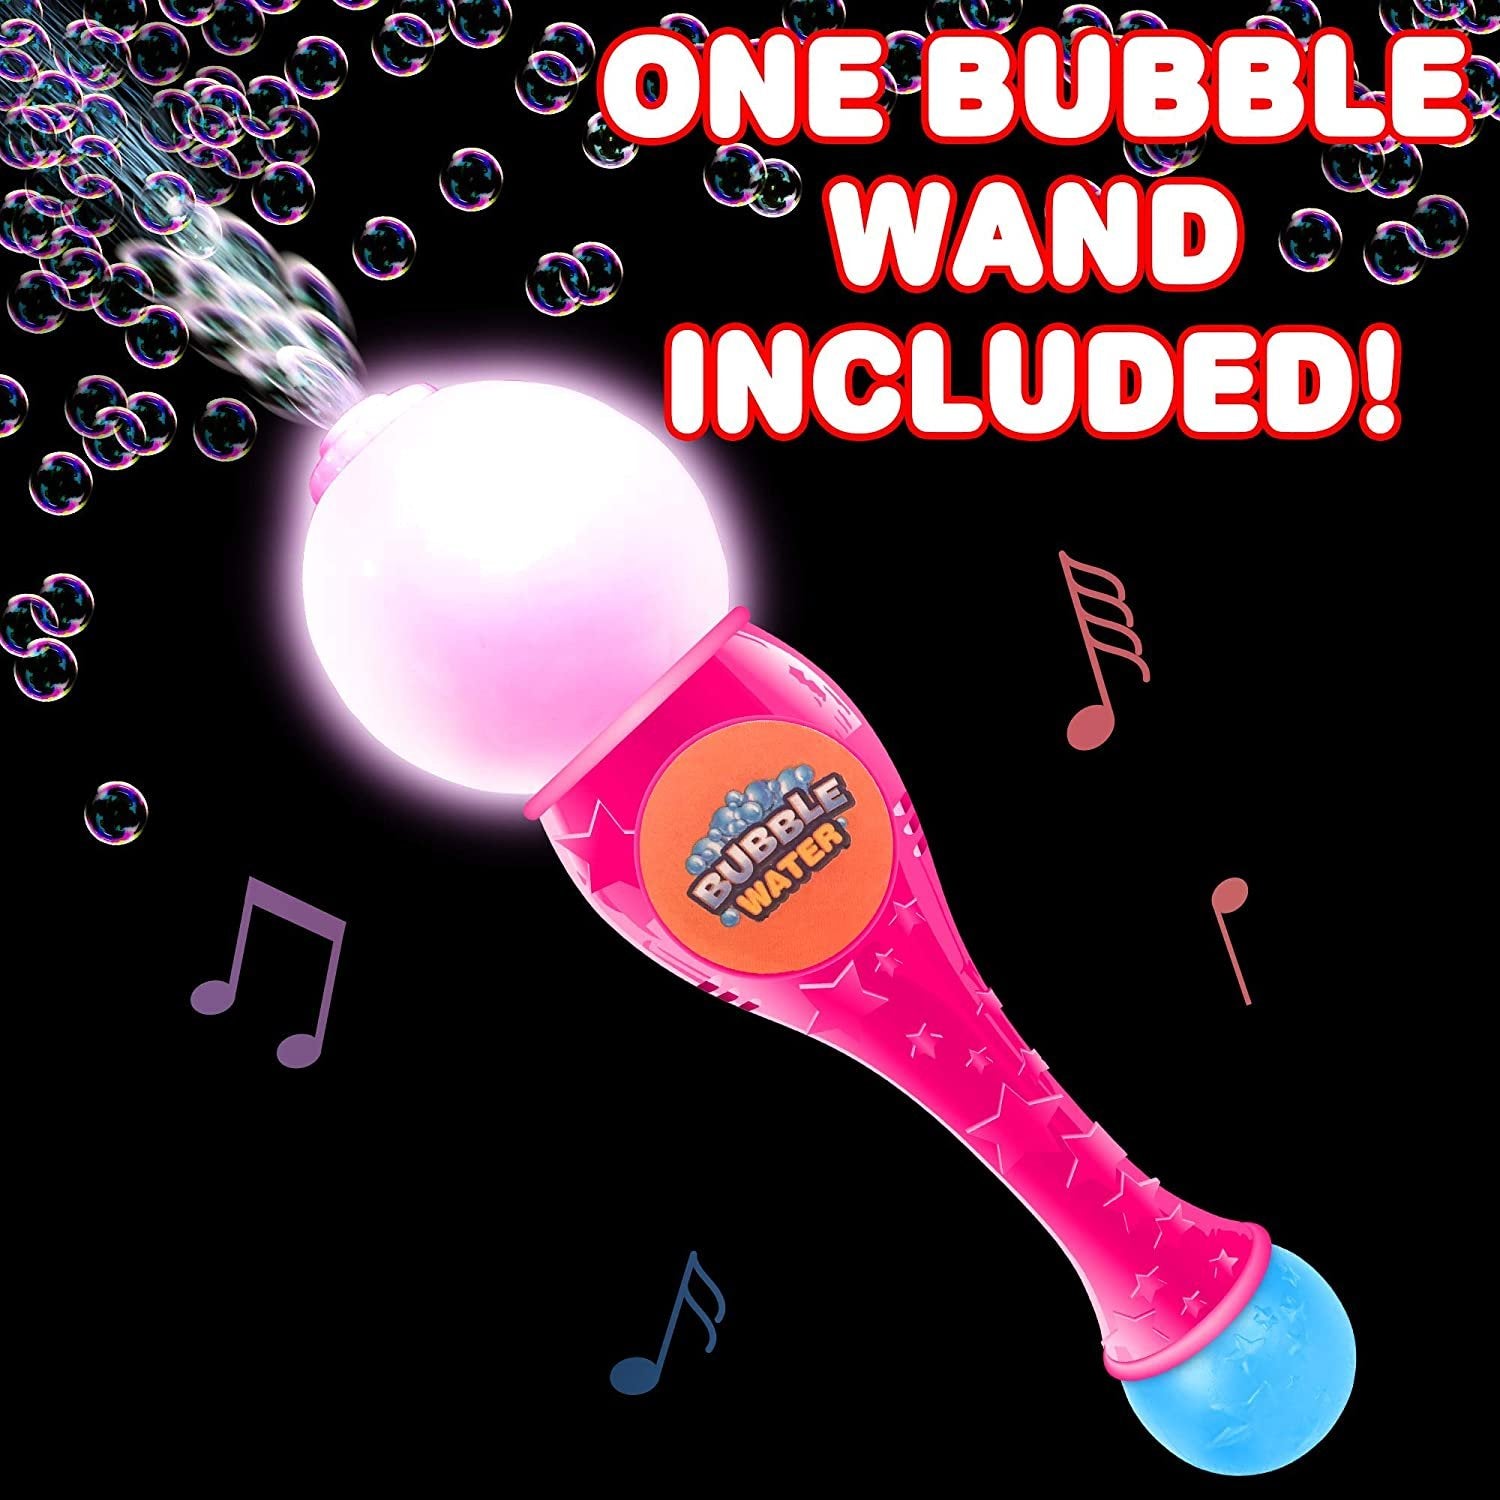 Light Up Bubble Blower Wand, 13.5" Illuminating Bubble Blower Wand with Thrilling LED & Sound Effect for Kids, Bubble Fluid & Batteries Included, Great Gift Idea, Party Favor - Pink